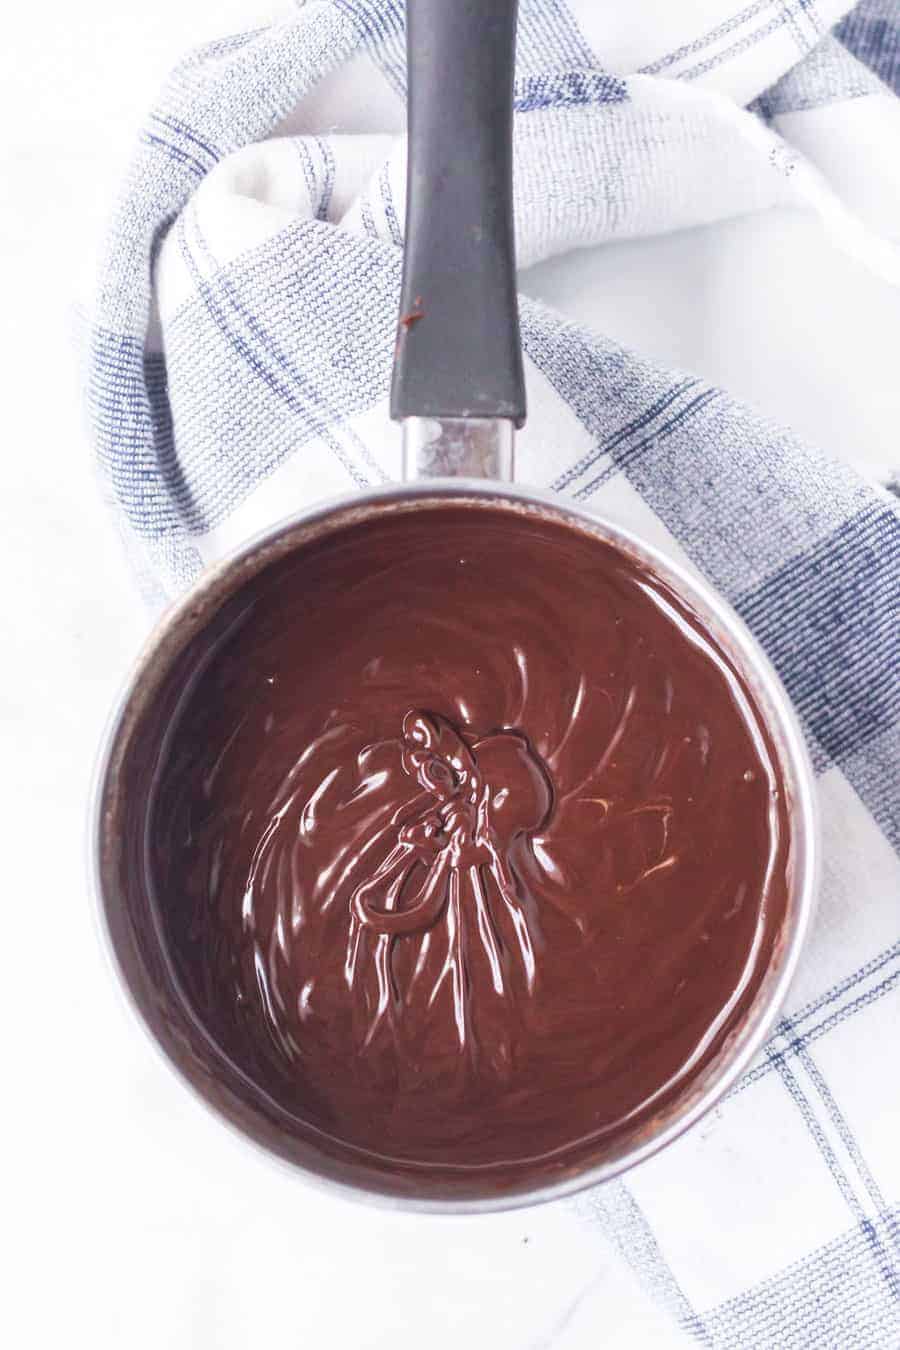 The dessert you've been missing in your life, this chocolate and salted caramel tart is everything you could want and more in a sweet treat -- including simple, step-by-step instructions to make it with ease! #tart #chocolatetart #dessert